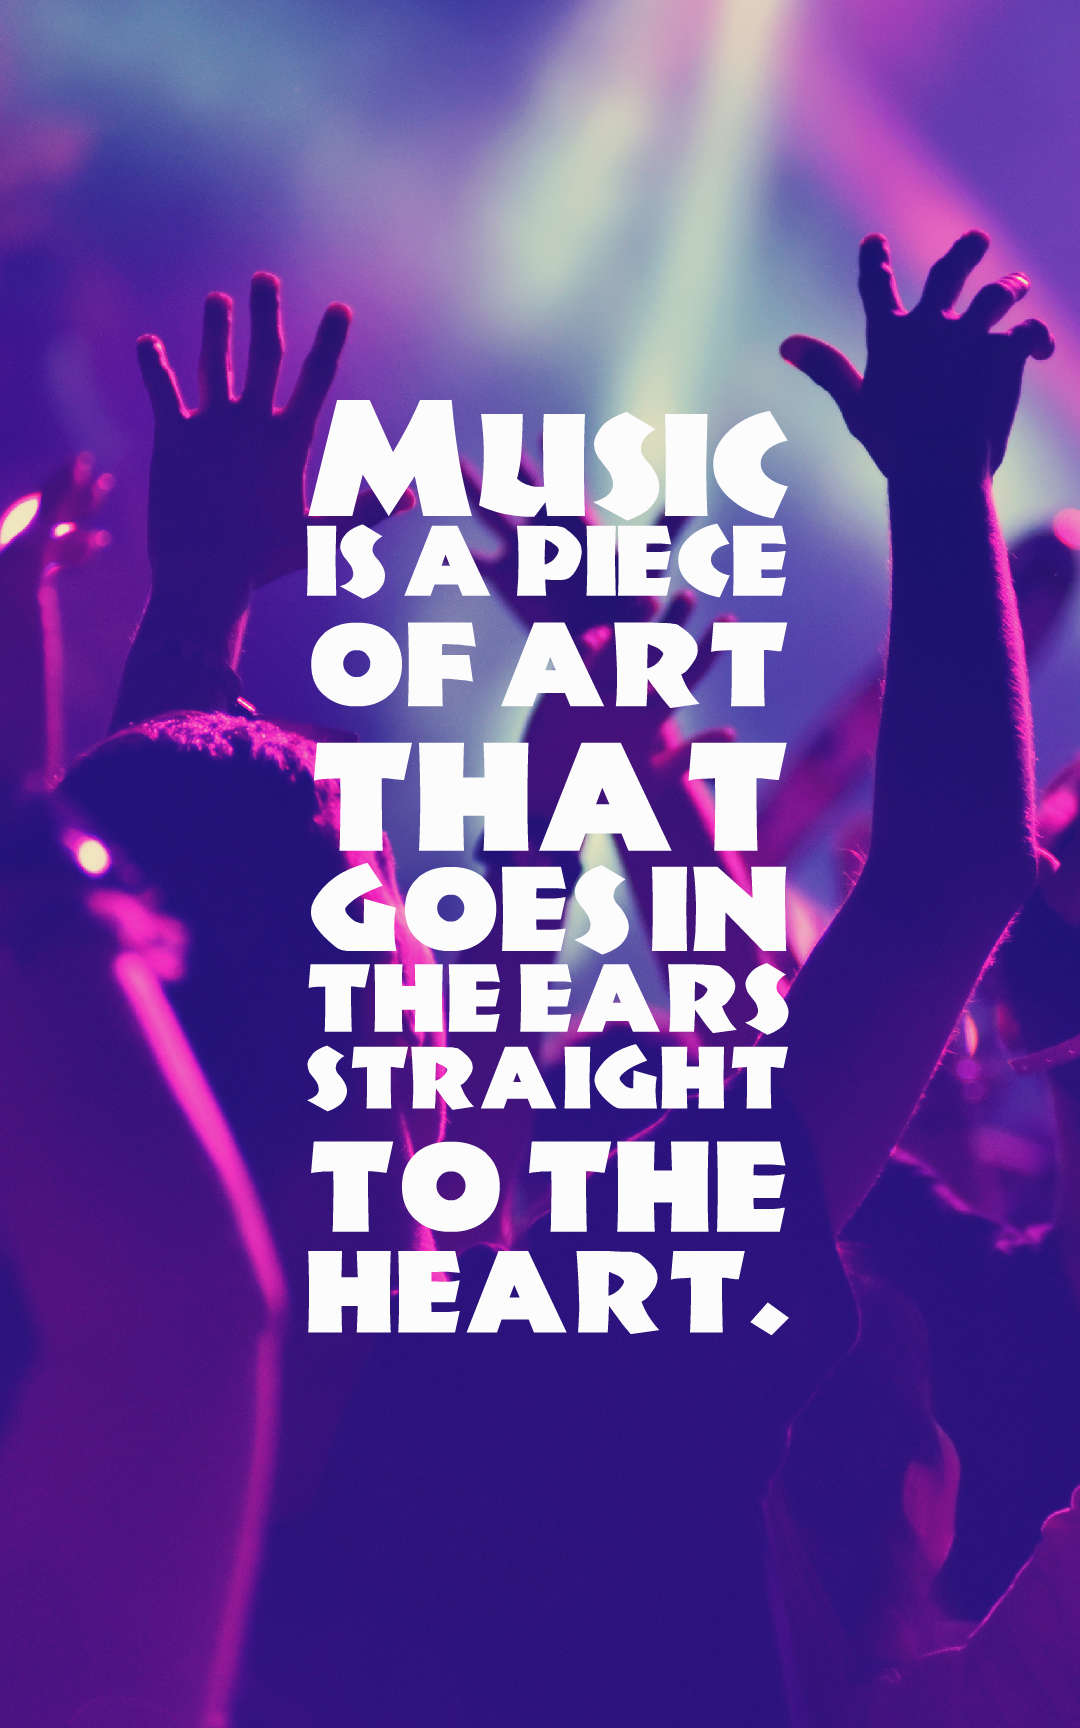 Music is a piece of art that goes in the ears straight to the heart.